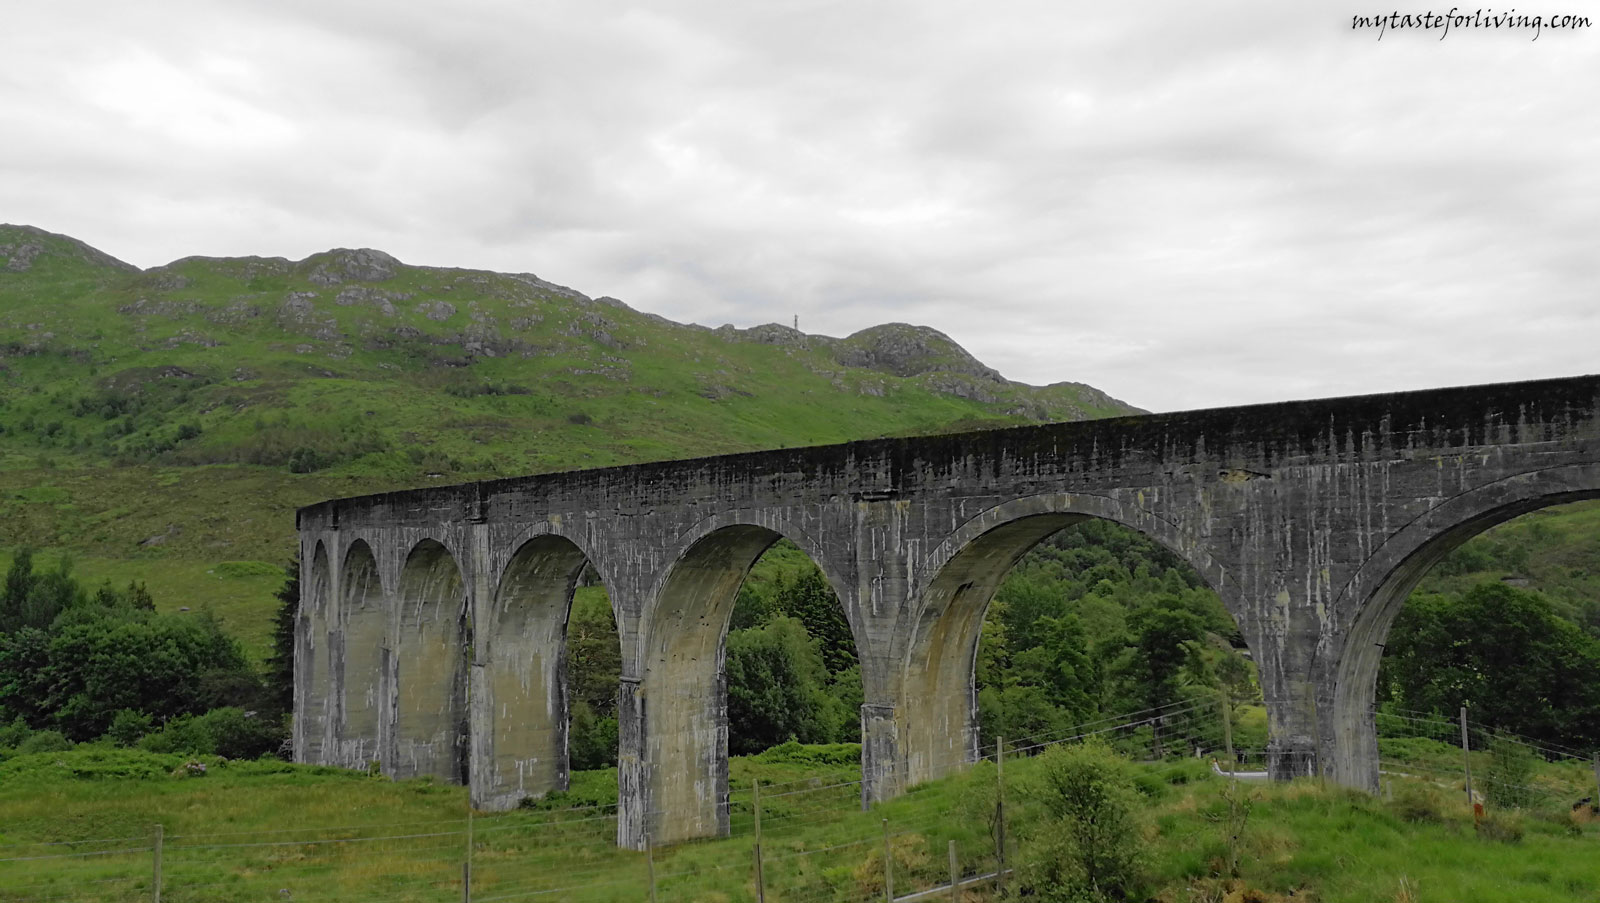 Even if someone hasn't traveled to the Glenfinnan Viaduct, Scotland, then certainly seen it the bridge in the Harry Potter movie. It is here, along this route, where scenes were filmed on the famous "Hogwarts Express" steam train from the second and third Harry Potter film.